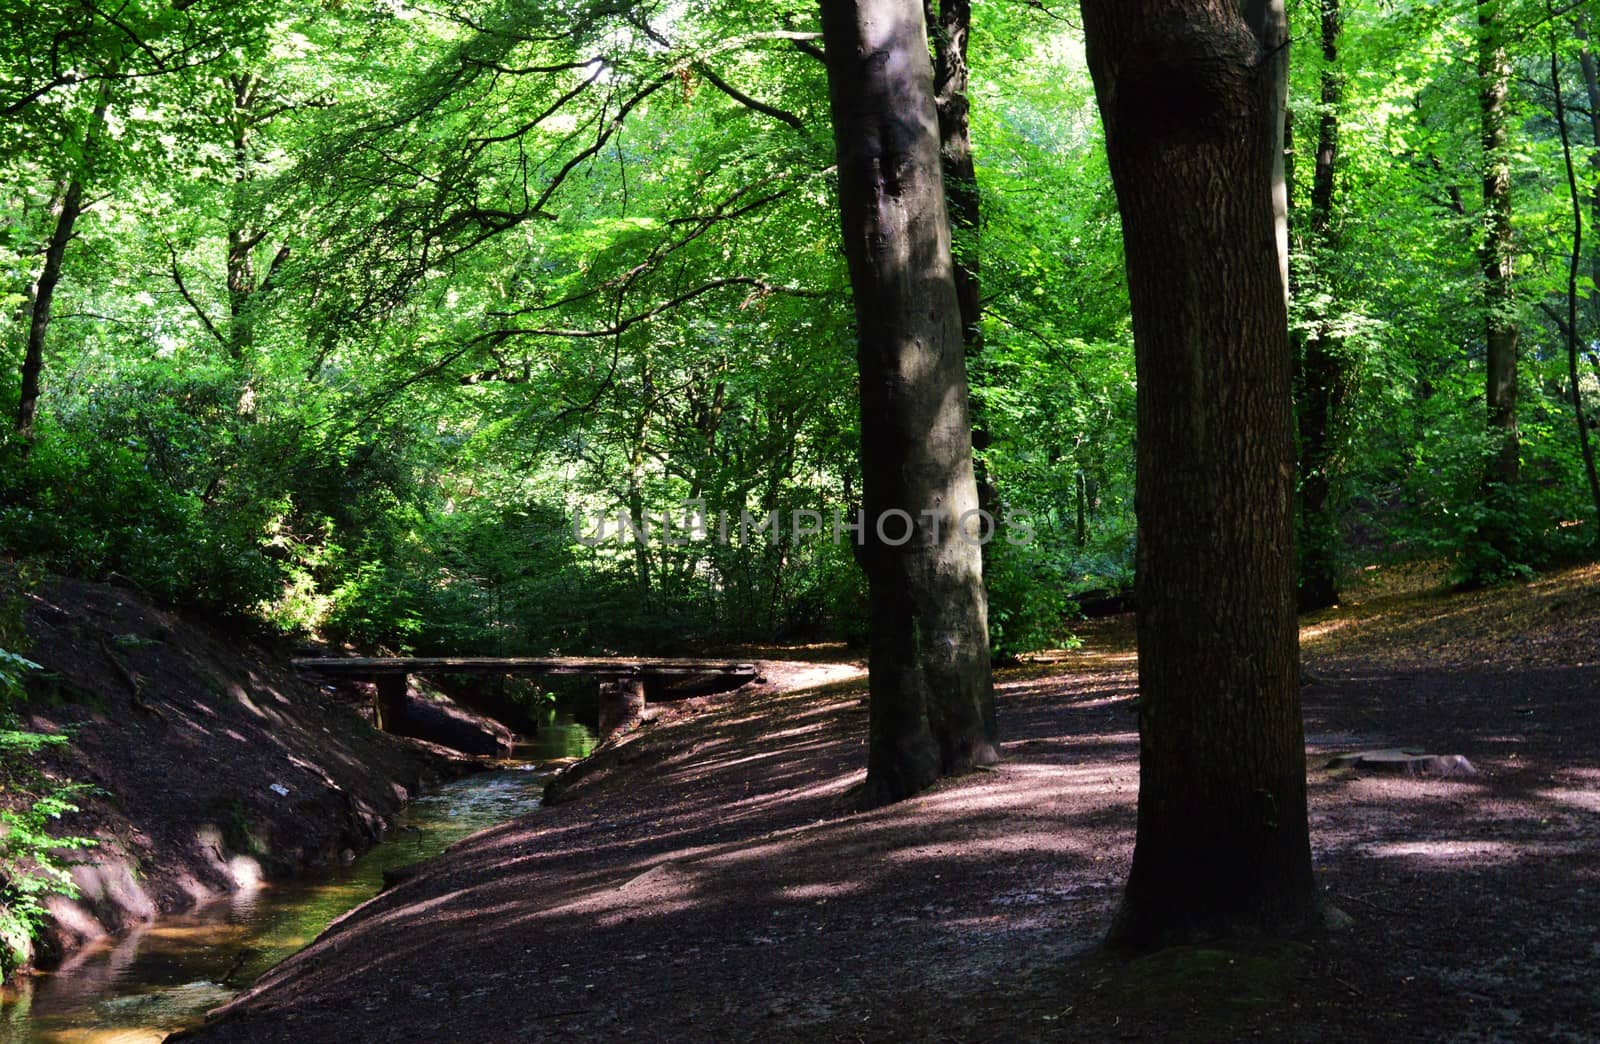 An image of a woodland walk in a country park.